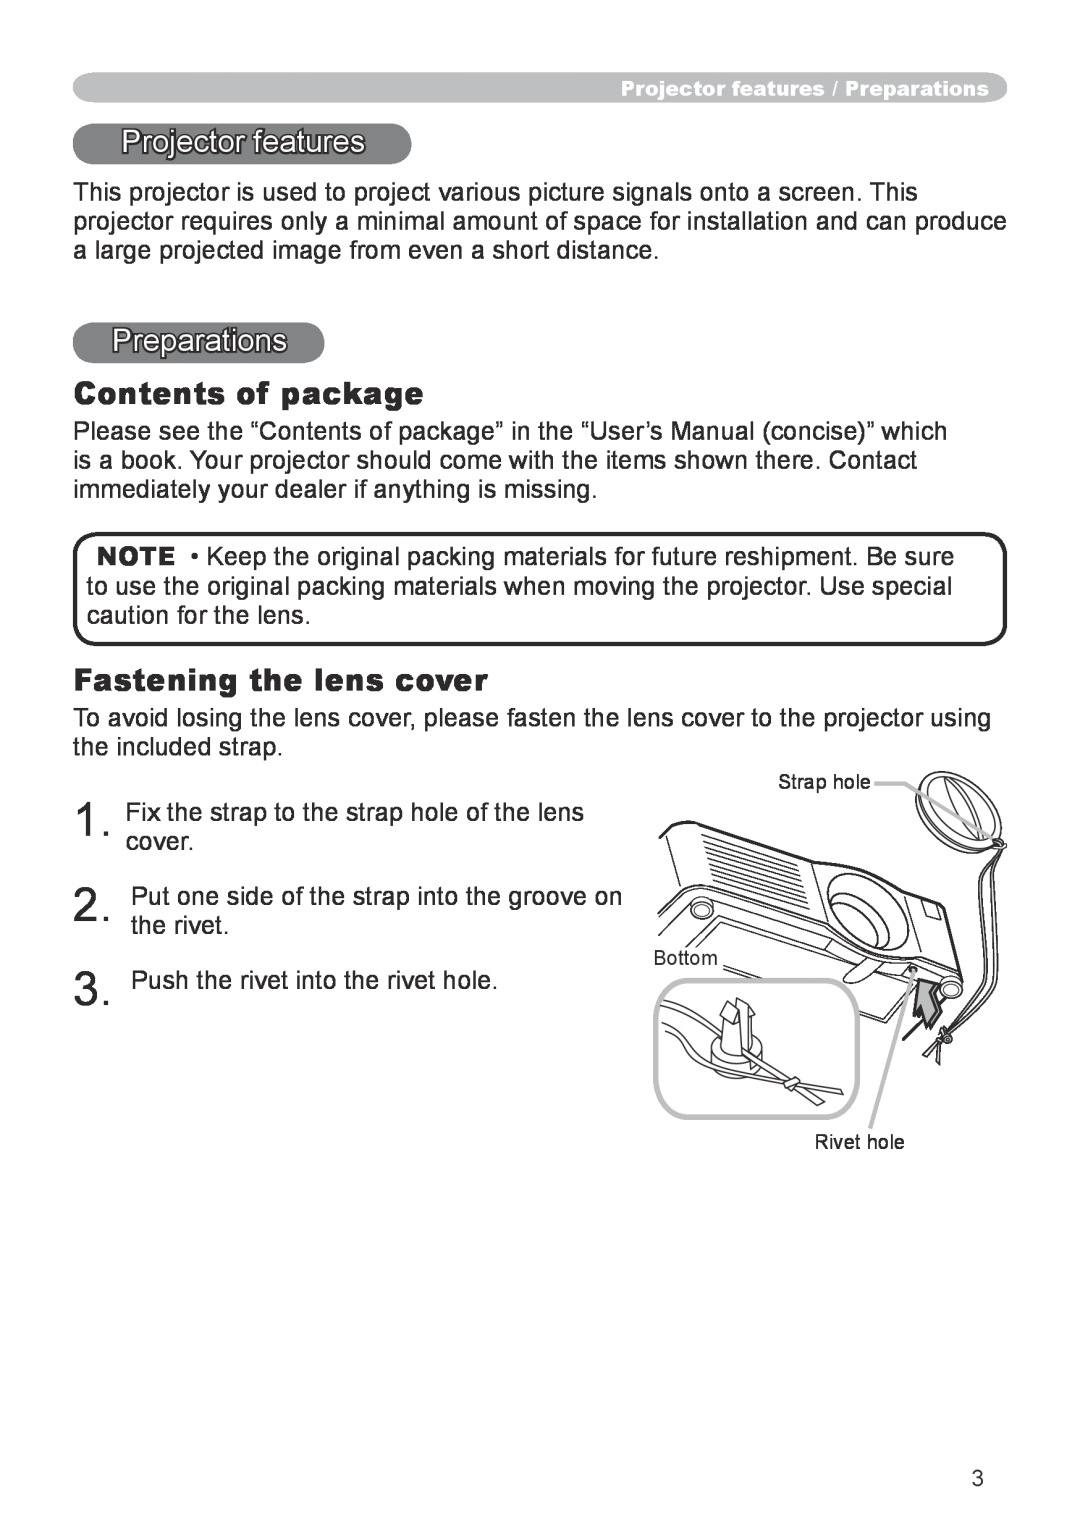 Hitachi CP-X600 user manual Projector features, Preparations, Contents of package, Fastening the lens cover 